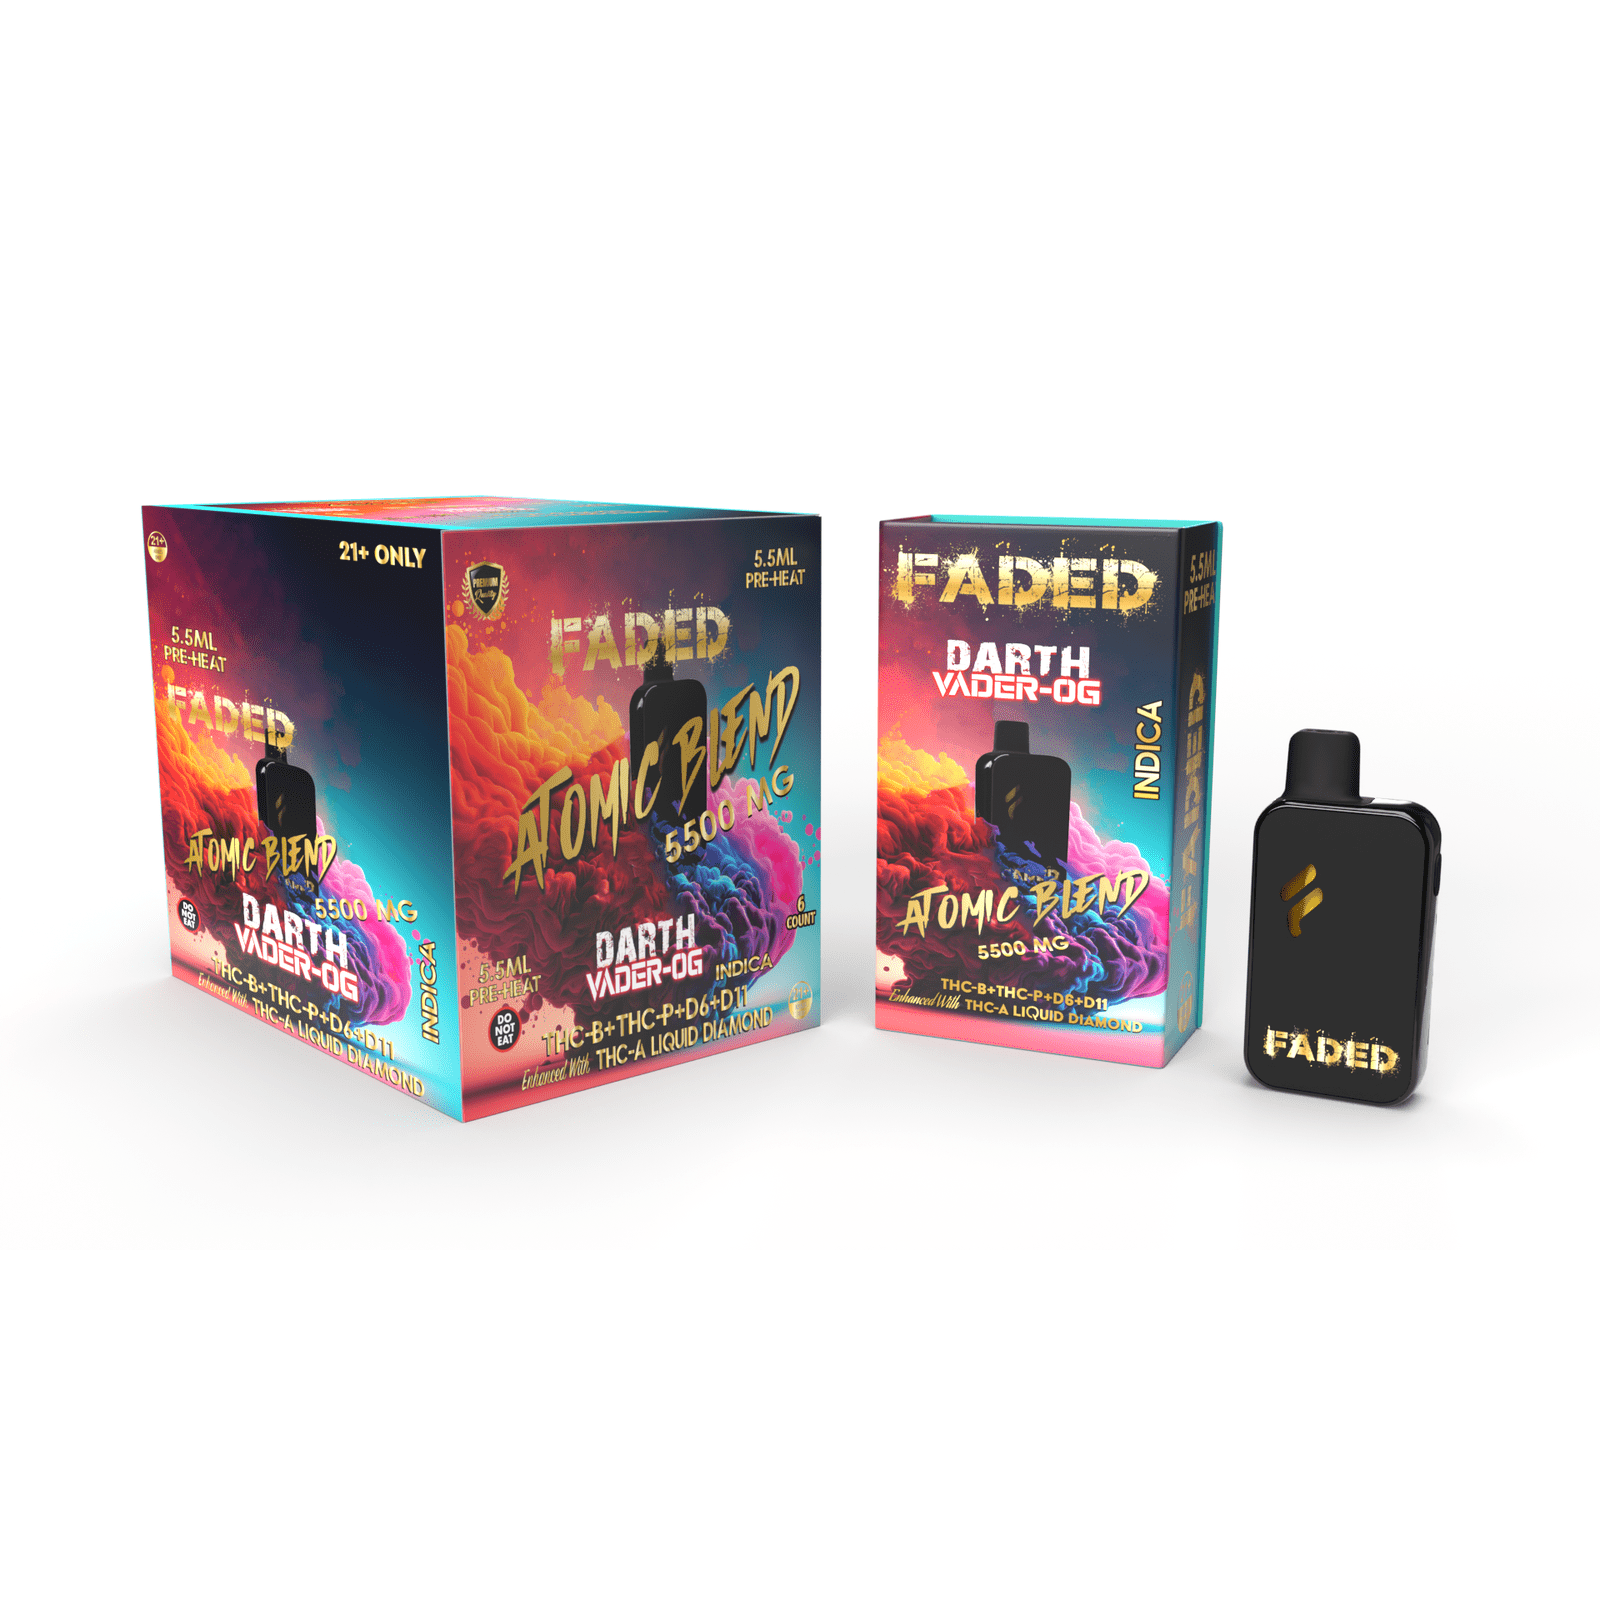 FADED THC-B+THC-P+D6+D11 ENHANCED WITH THC-A LIQUID DIAMOND RECHARGEABLE DISPOSABLE - INDICA DARTH VADER-OG 5.5ML